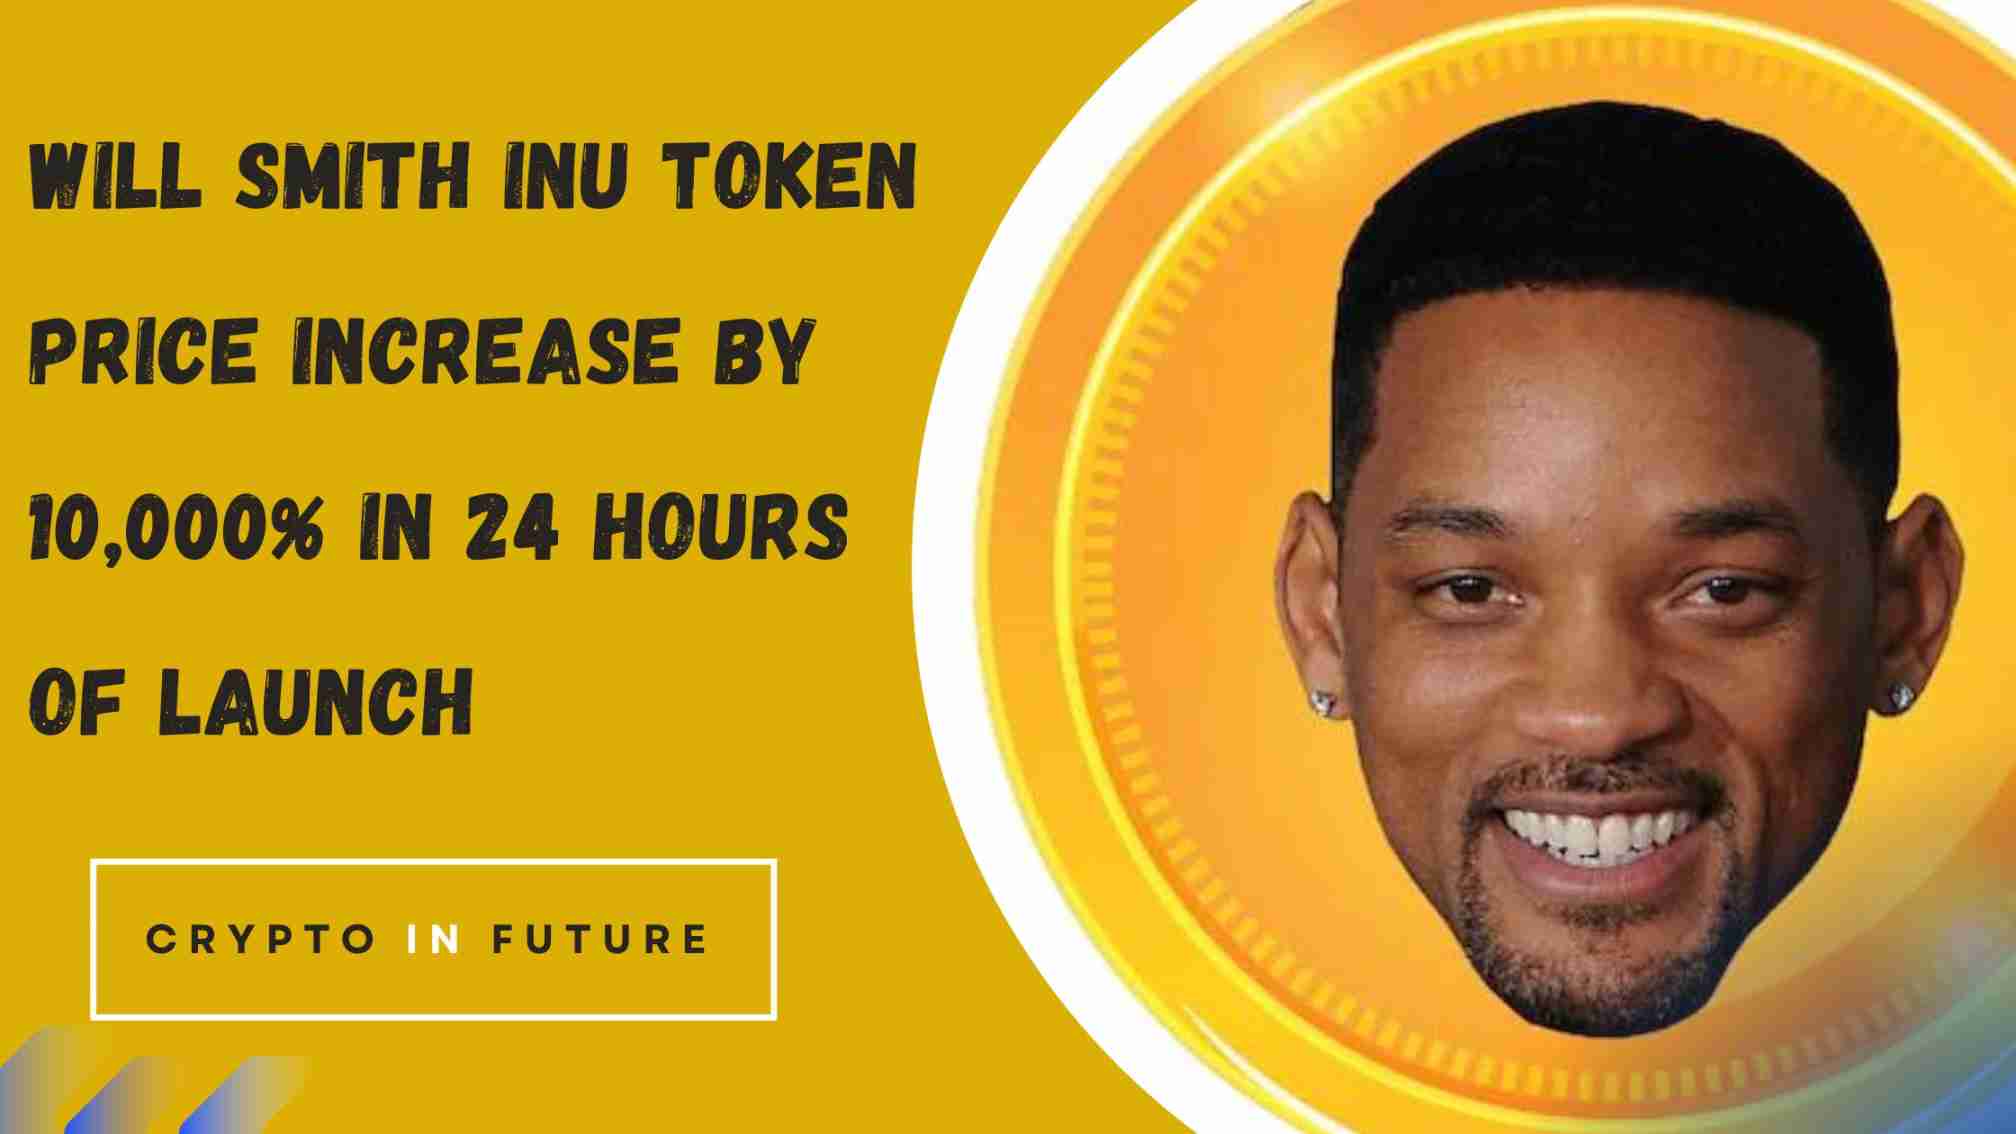 Will Smith Inu Token Price Increase by 10,000% in 24 Hours of Launch